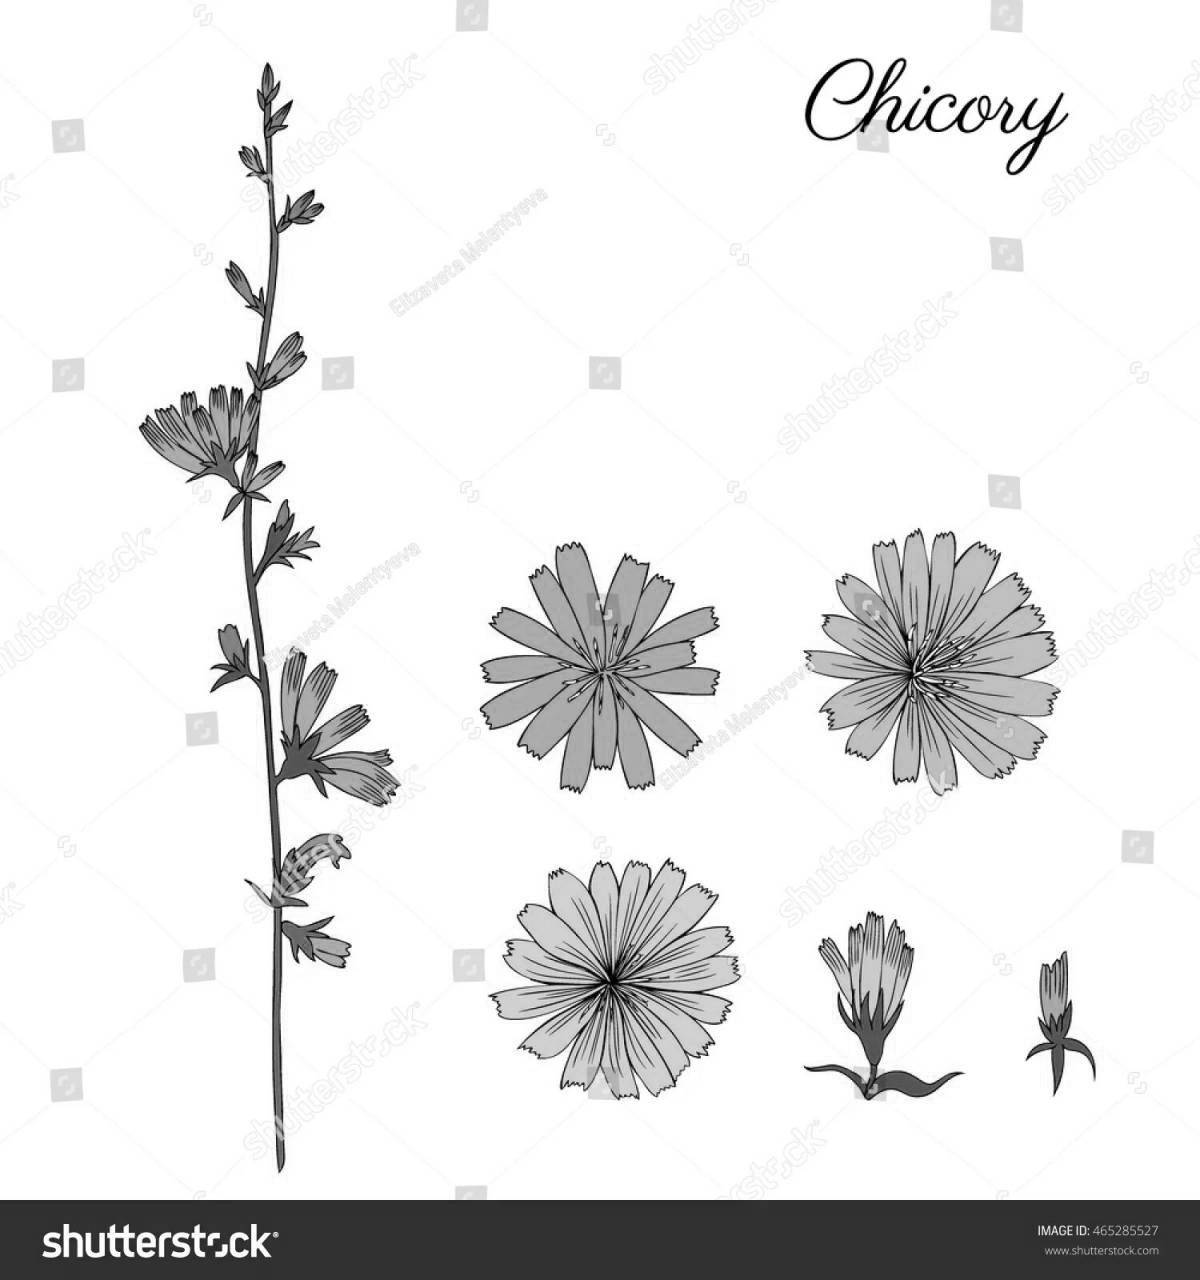 Coloring book striking chicory